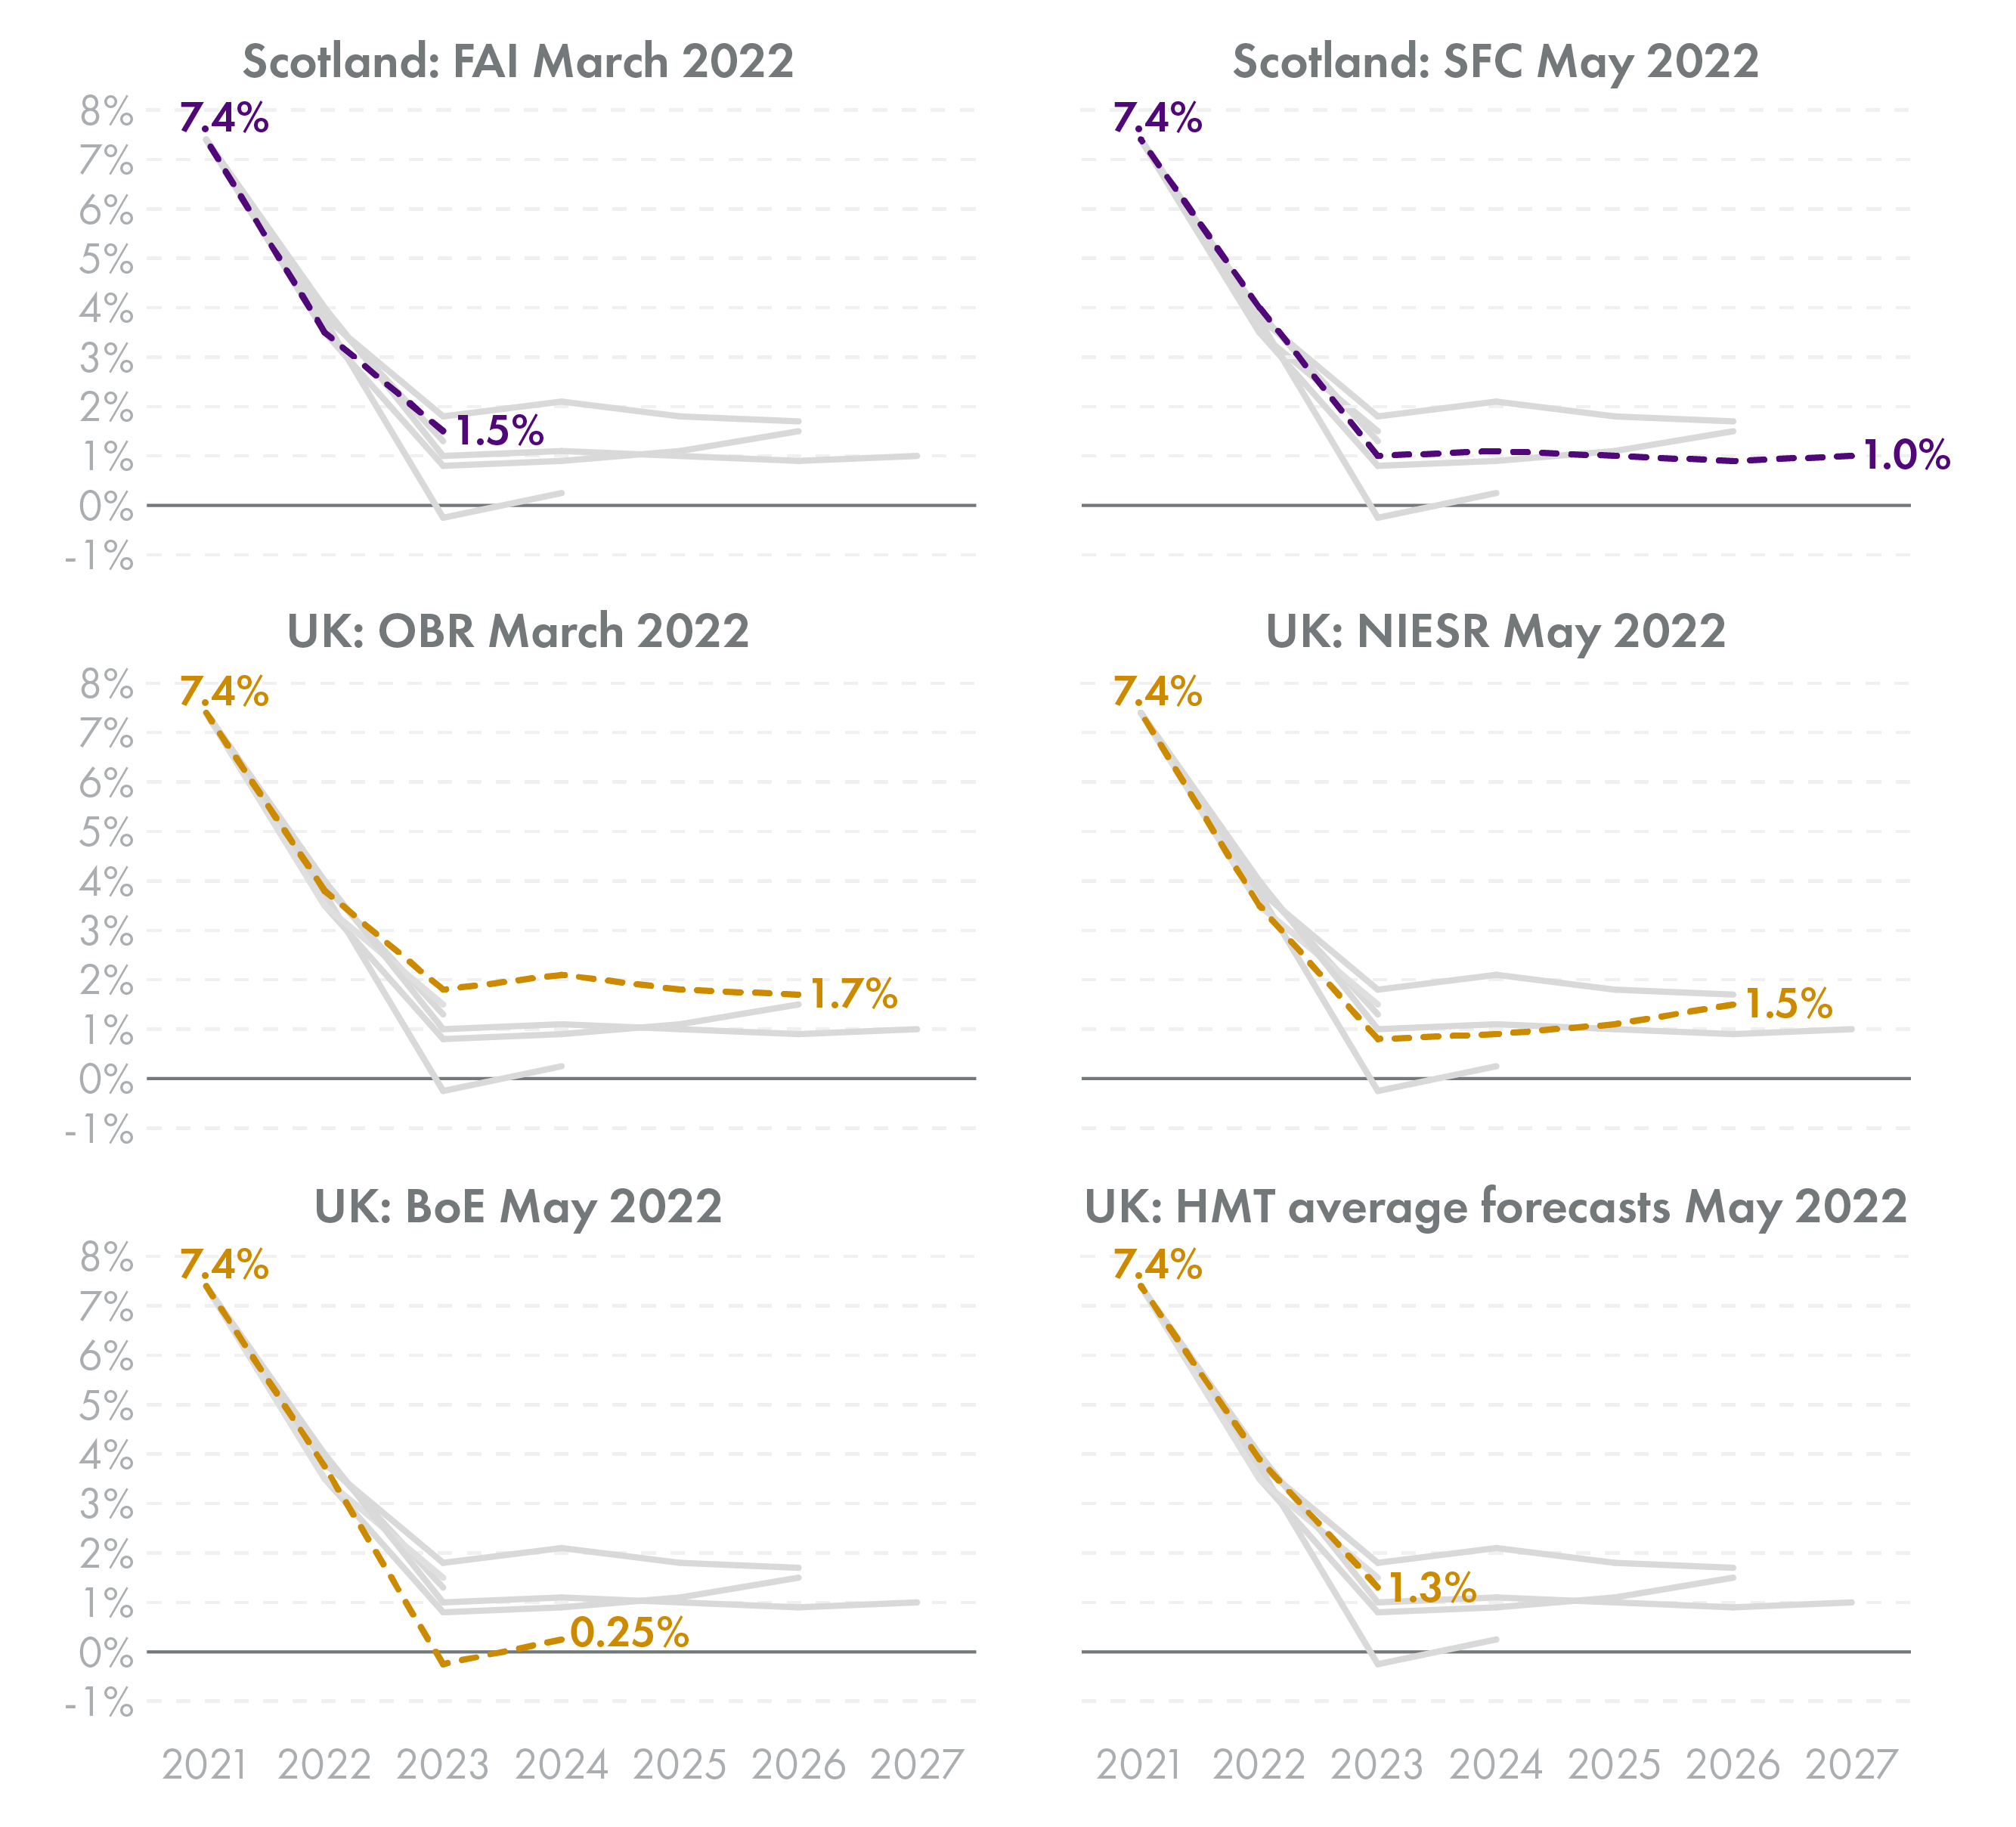 Six line charts comparing forecasts for growth in the Scottish and UK economies for each year between 2021 and 2027.